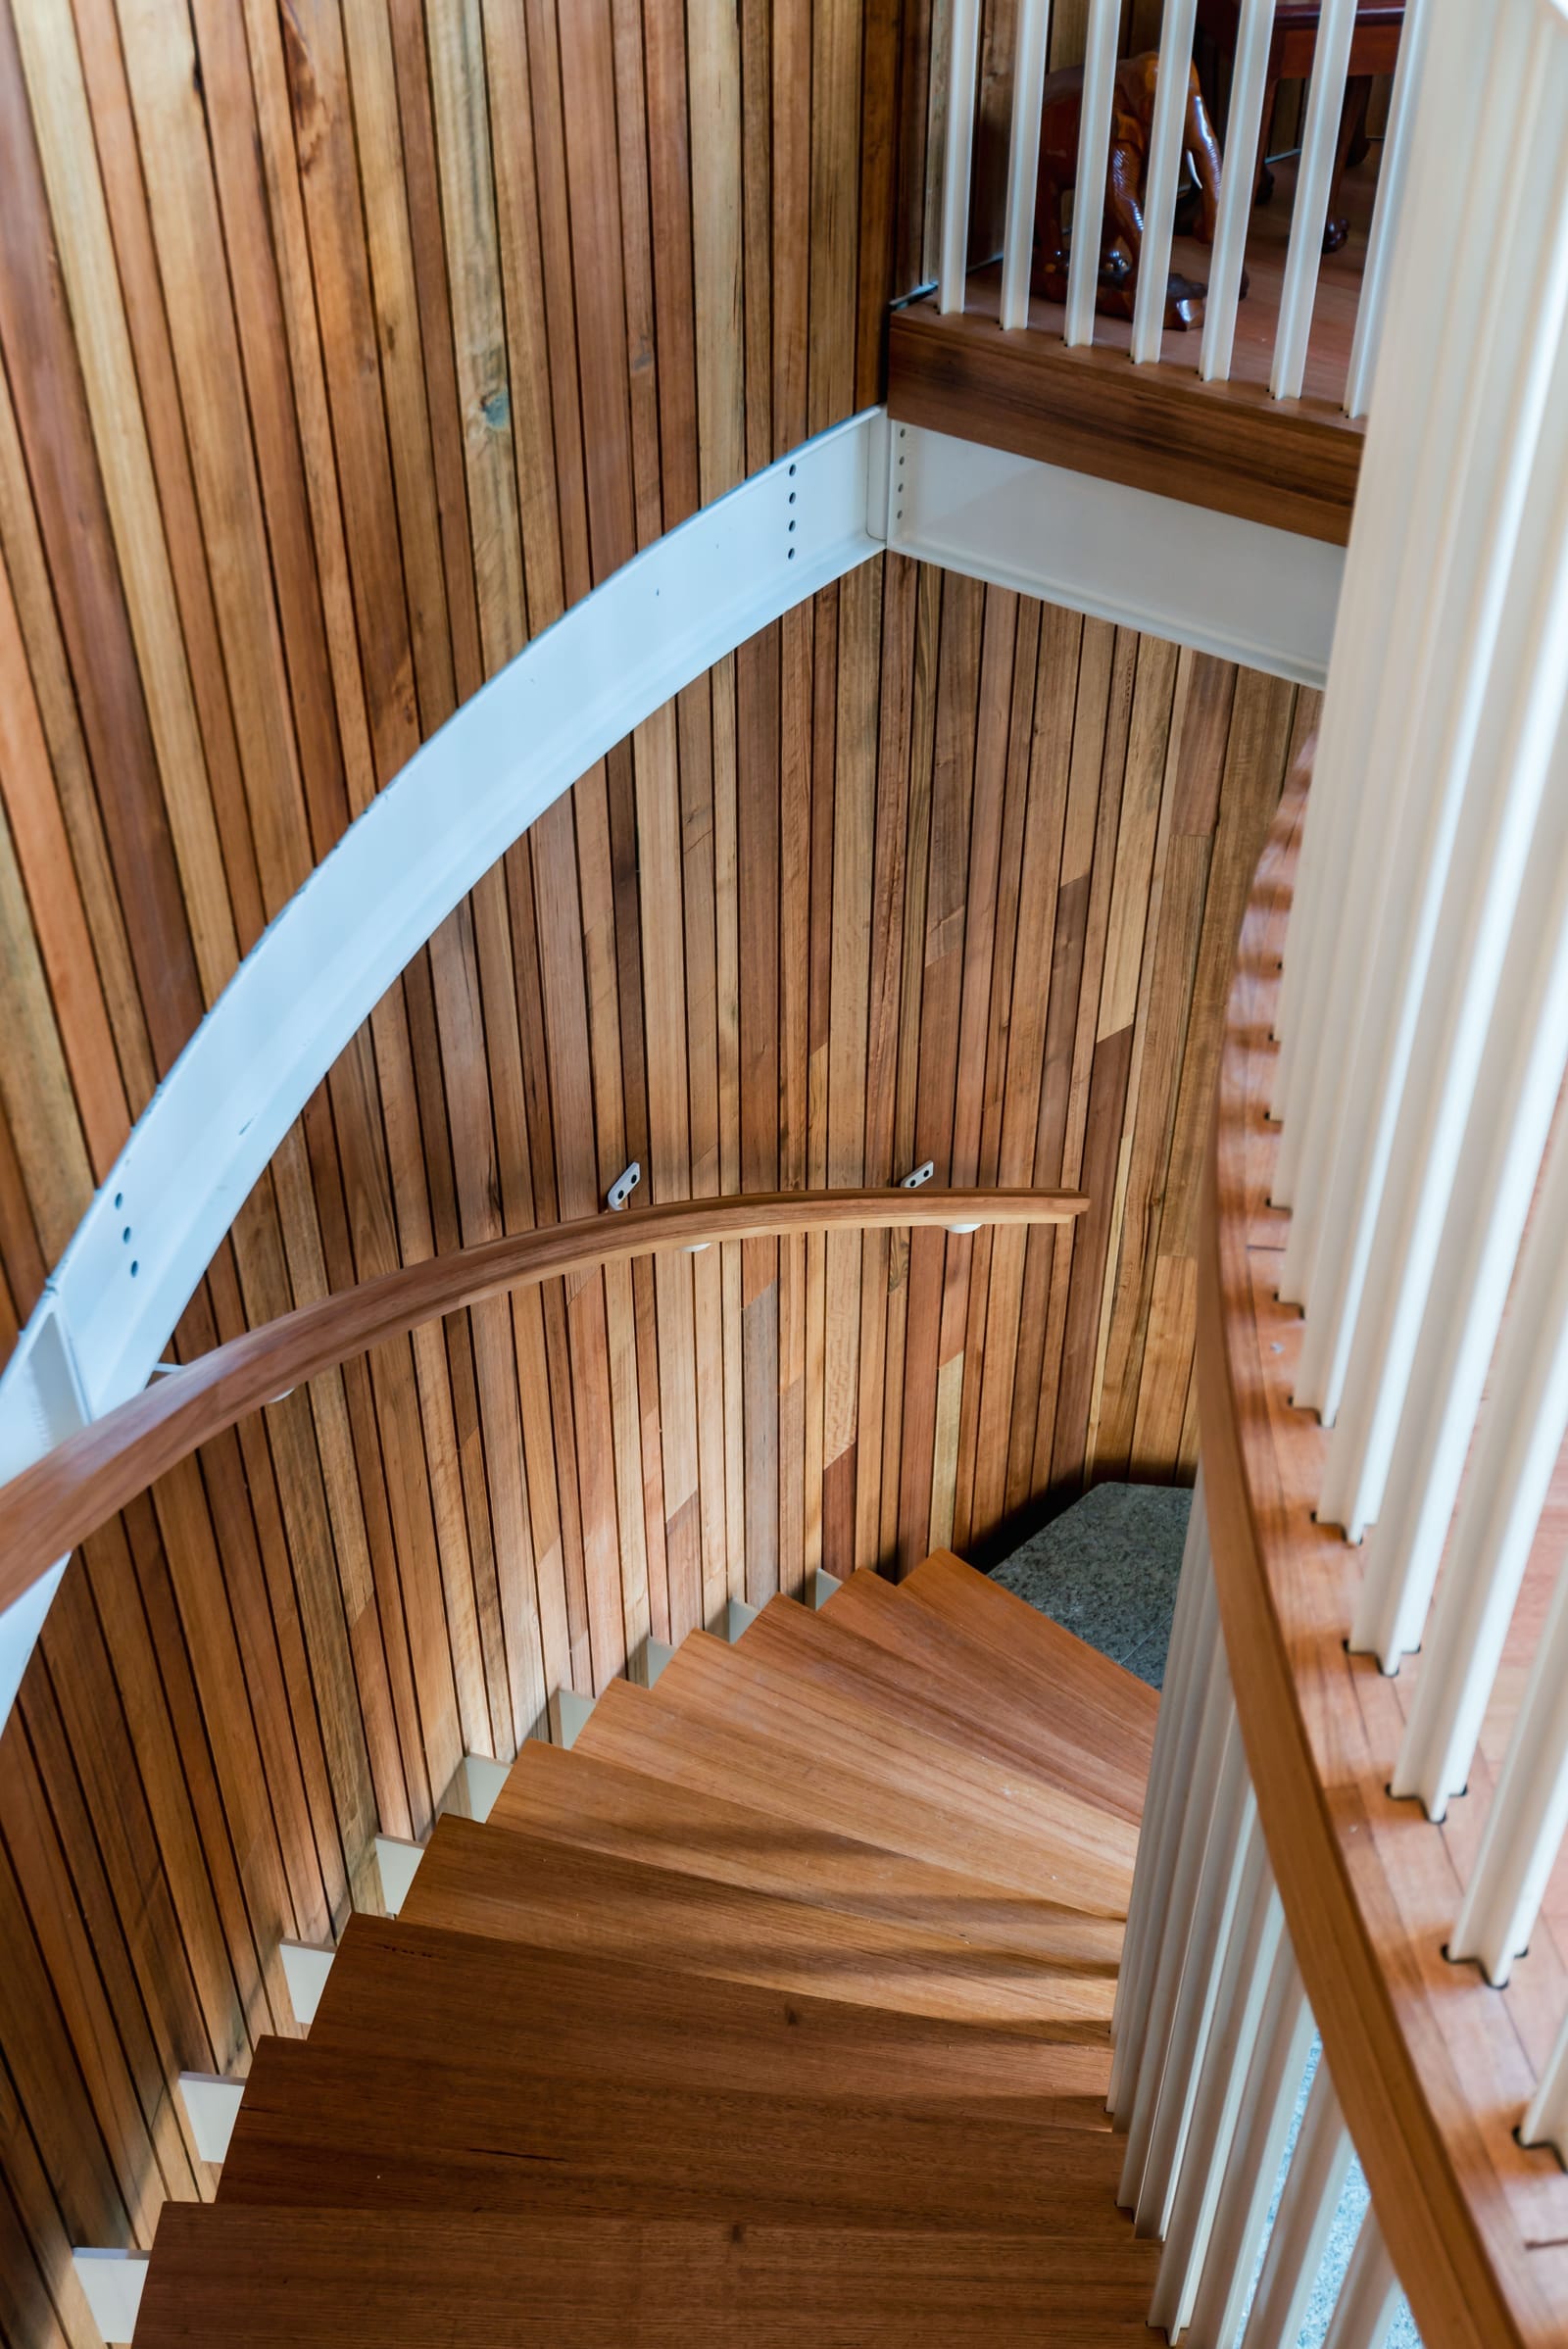 Wattle Bird House by Flett Architecture. Photography by Matt Sansom. Curved timber staircase leading downstairs. Timber clad walls and timber balustrades.